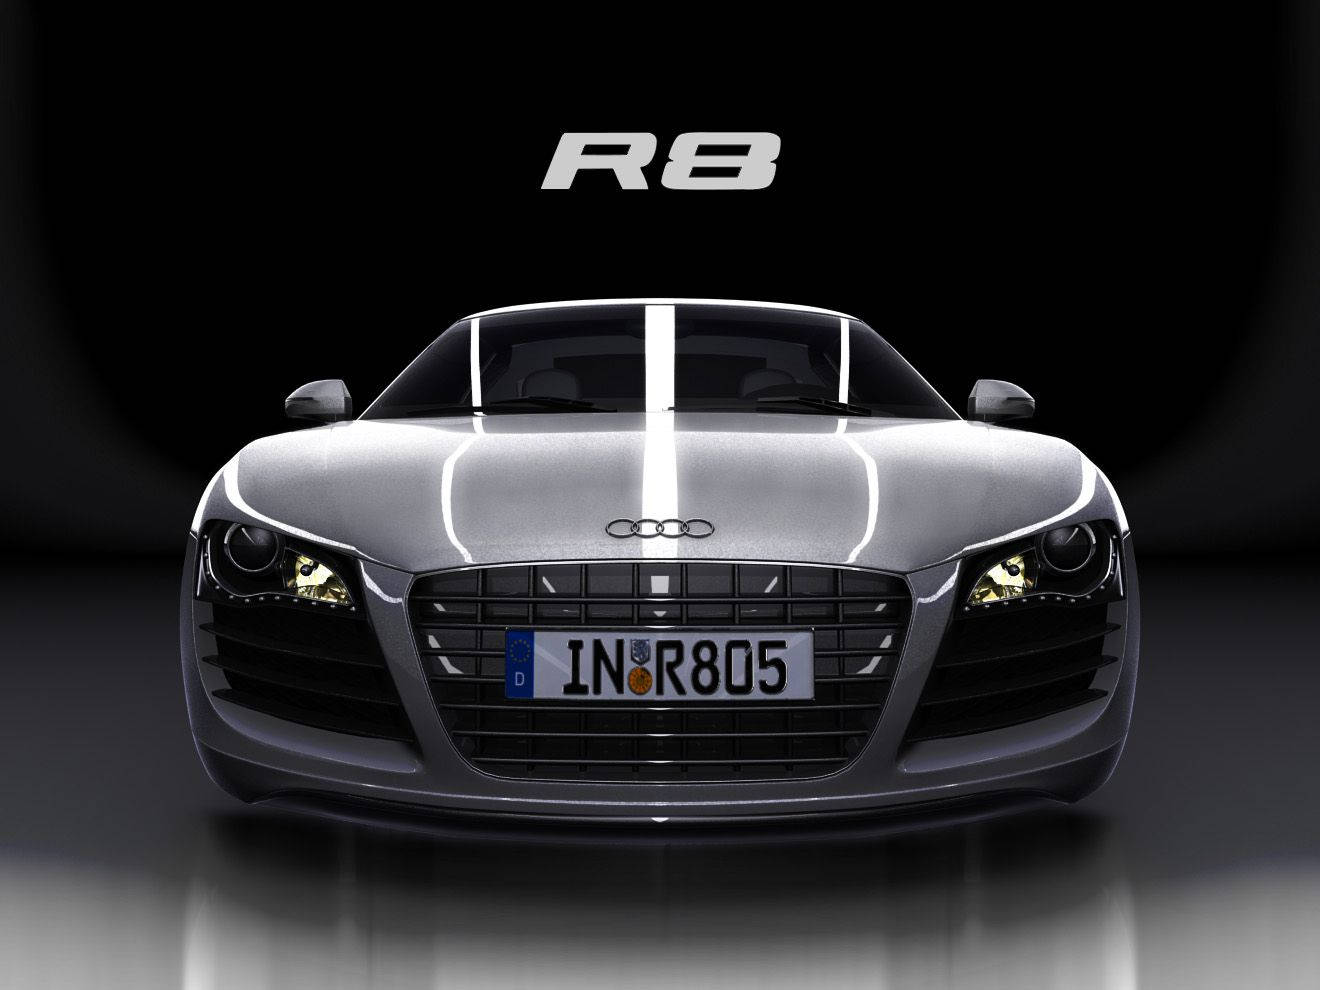 Silver Audi R8 Front Background